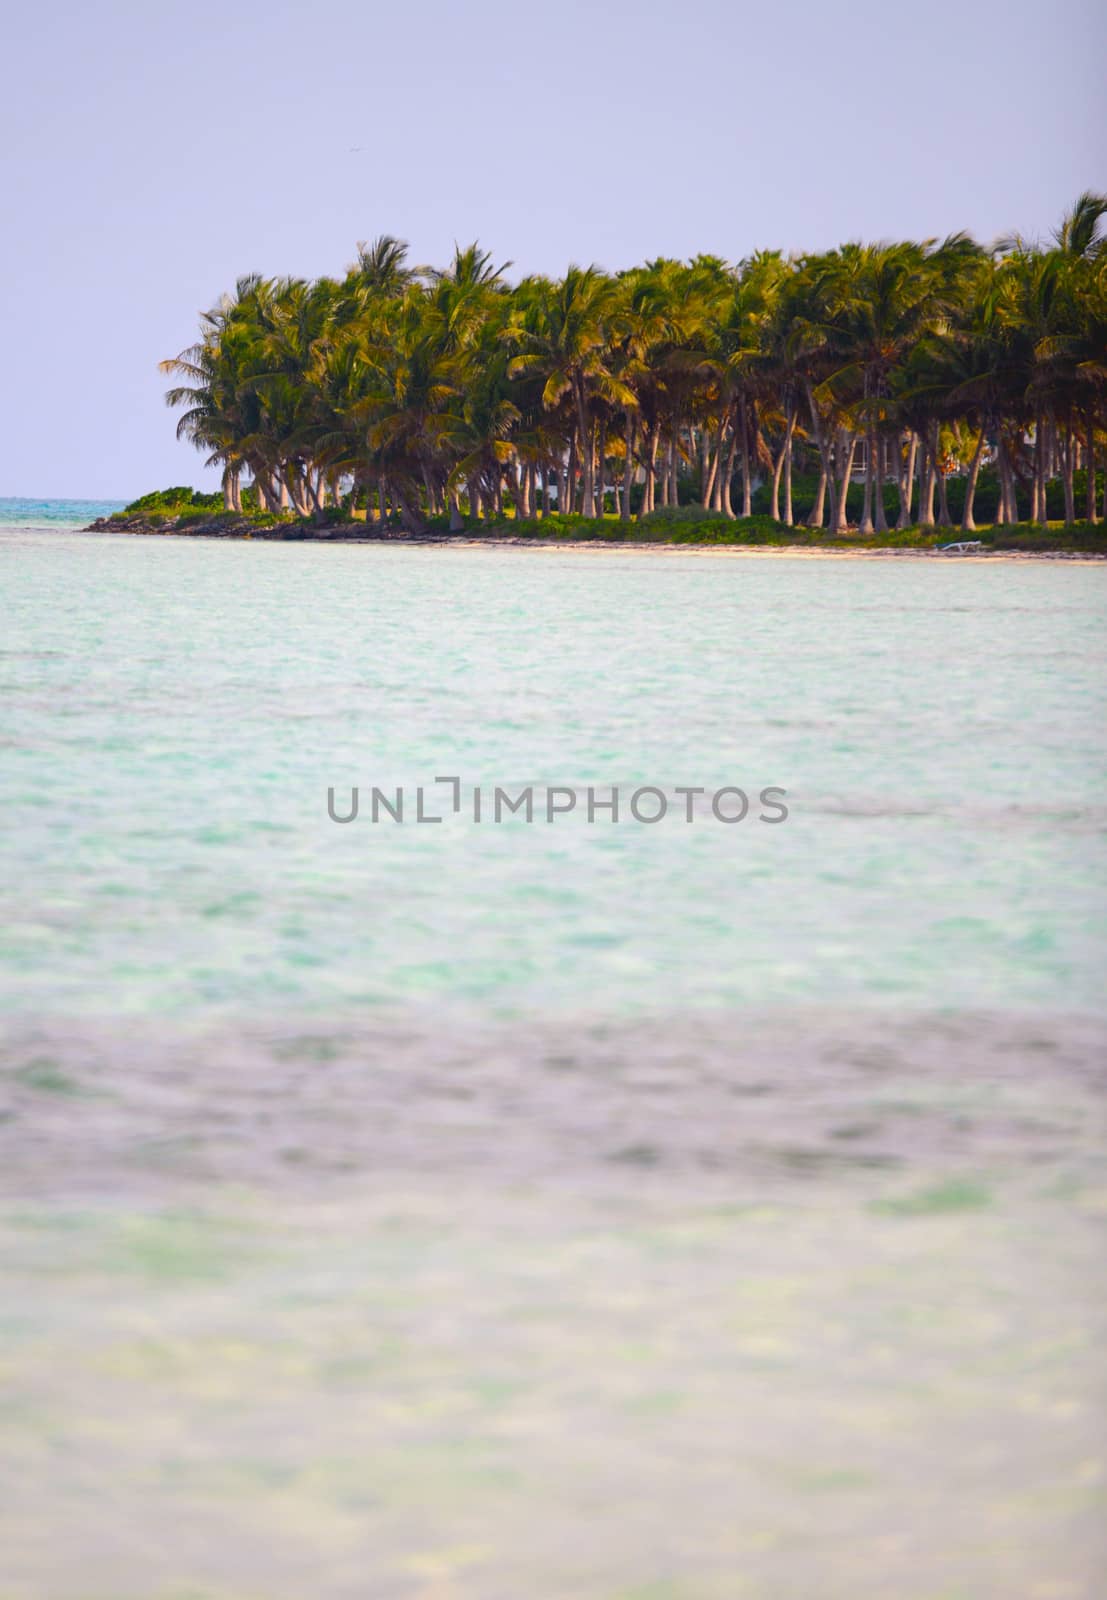 Island in the Bahamas by ftlaudgirl